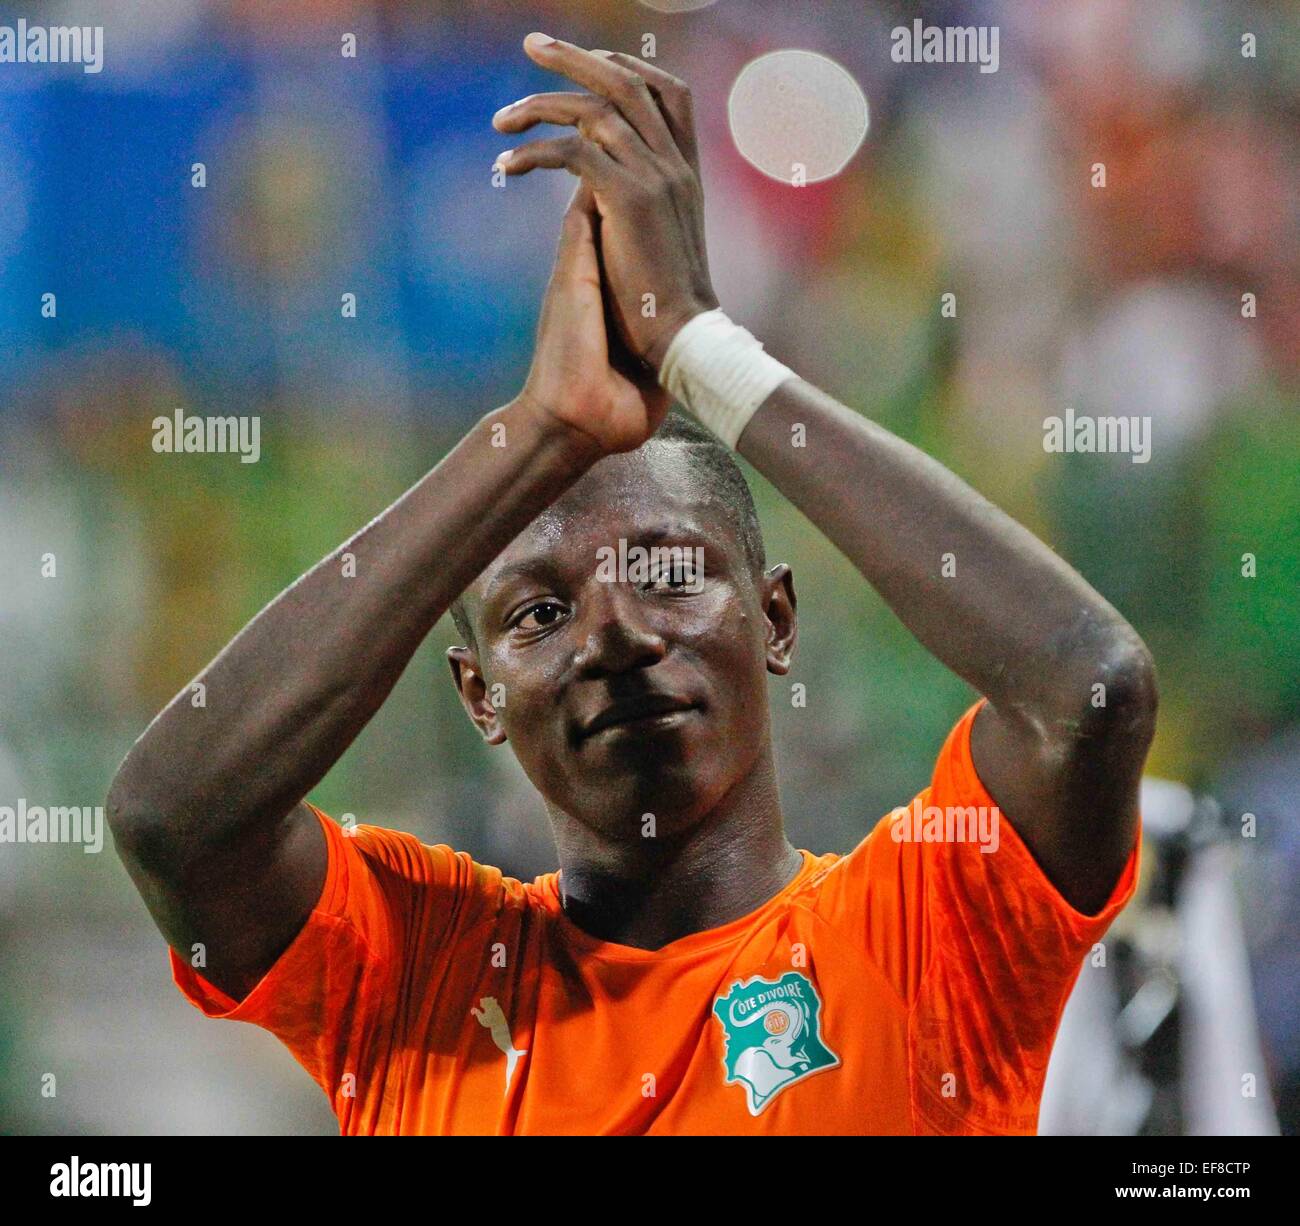 Malabo, Equatorial Guinea. 28th Jan, 2015. Max Alain Gradel of Cote d'Ivoire reacts to the audience after winning the group match of Africa Cup of Nations against Cameroon at the Stadium of Malabo, Equatorial Guinea, Jan. 28, 2015. Cote d'Ivoire won 1-0. Credit:  Li Jing/Xinhua/Alamy Live News Stock Photo